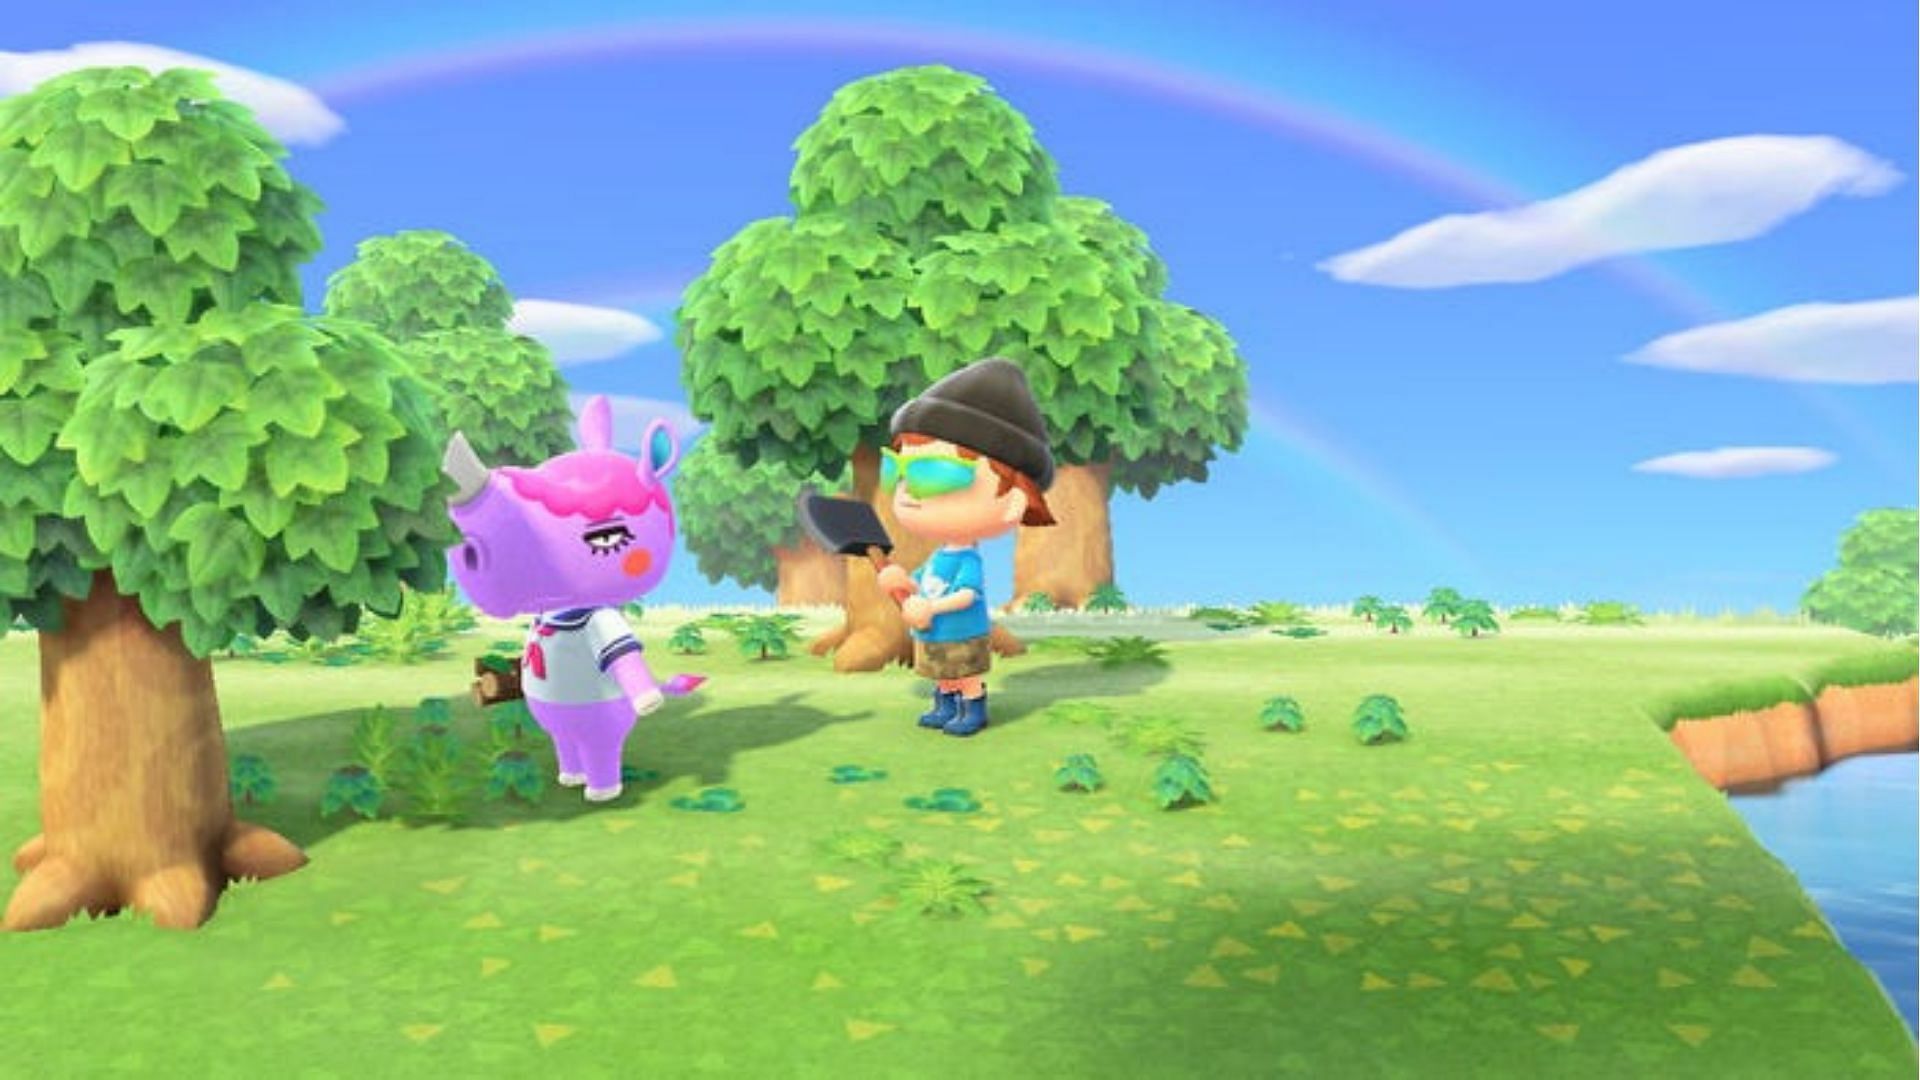 Things to do when bored in Animal Crossing: New Horizons (Image via Business Insider)